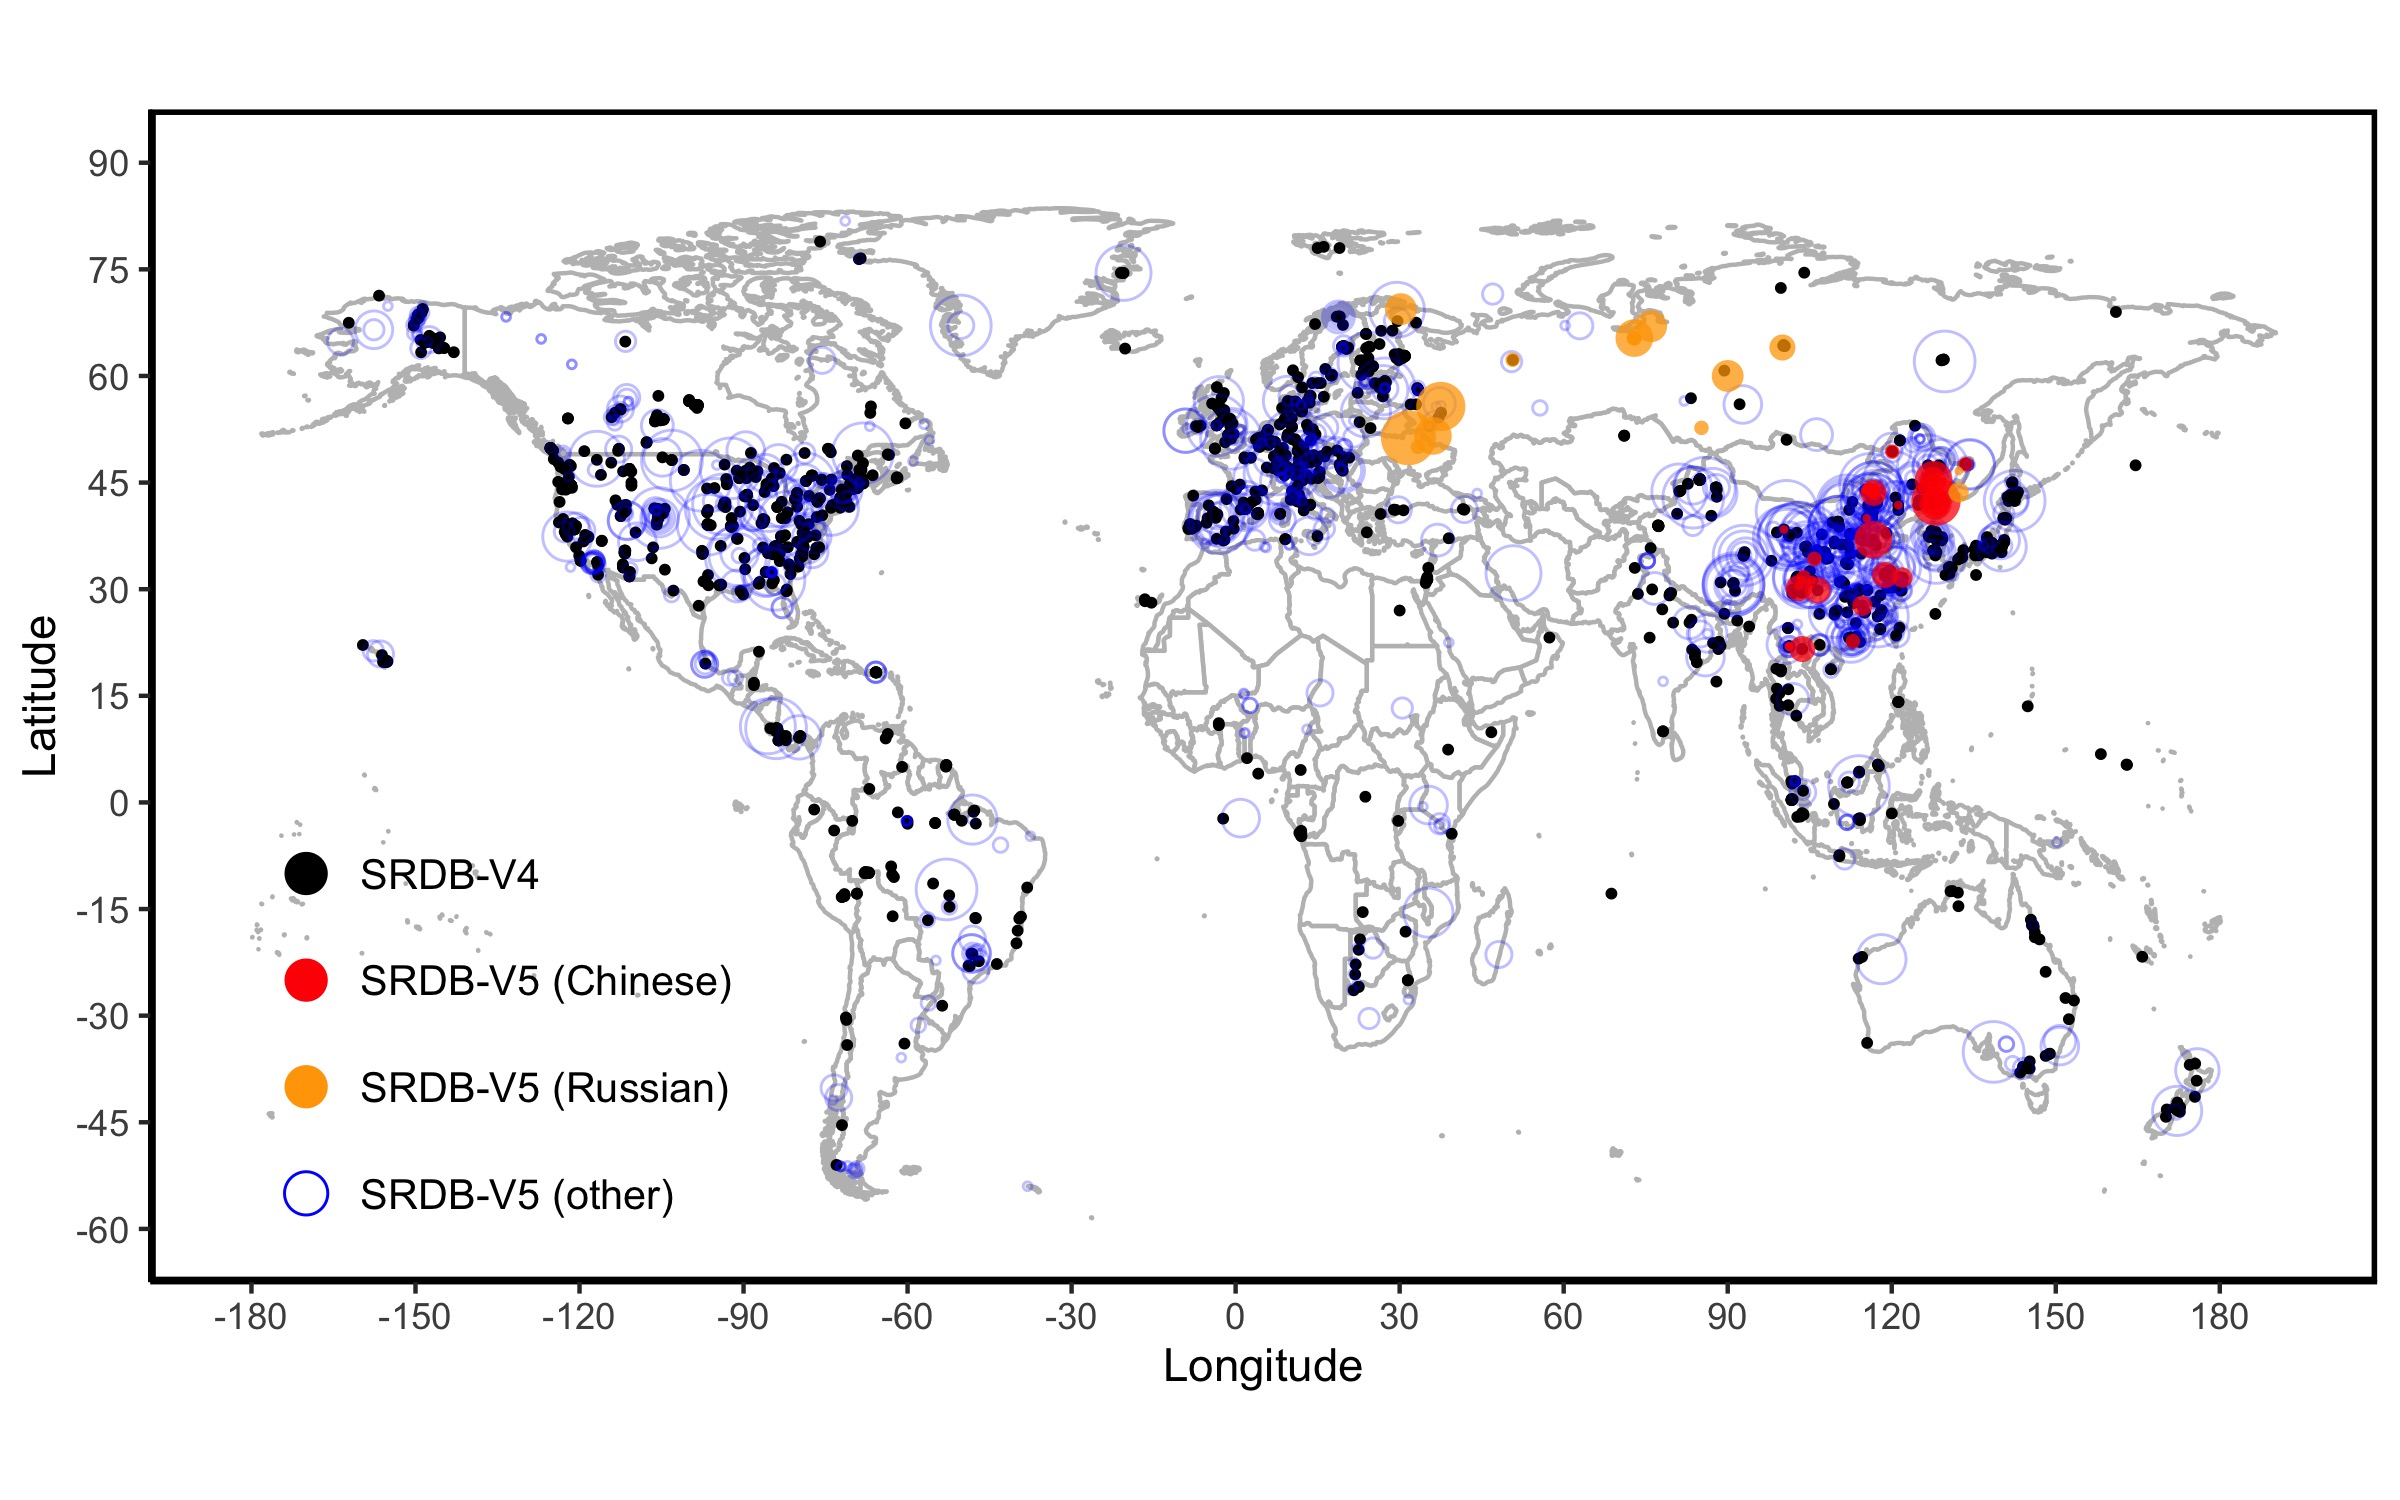 Locations of SRDB V5 observations combining pre-existing observations from V4, as well as new observations from Russian, Chinese, and literature from other languages, primarily published in English. The size of circles represents the sample size at each site, where larger circles signify more data.